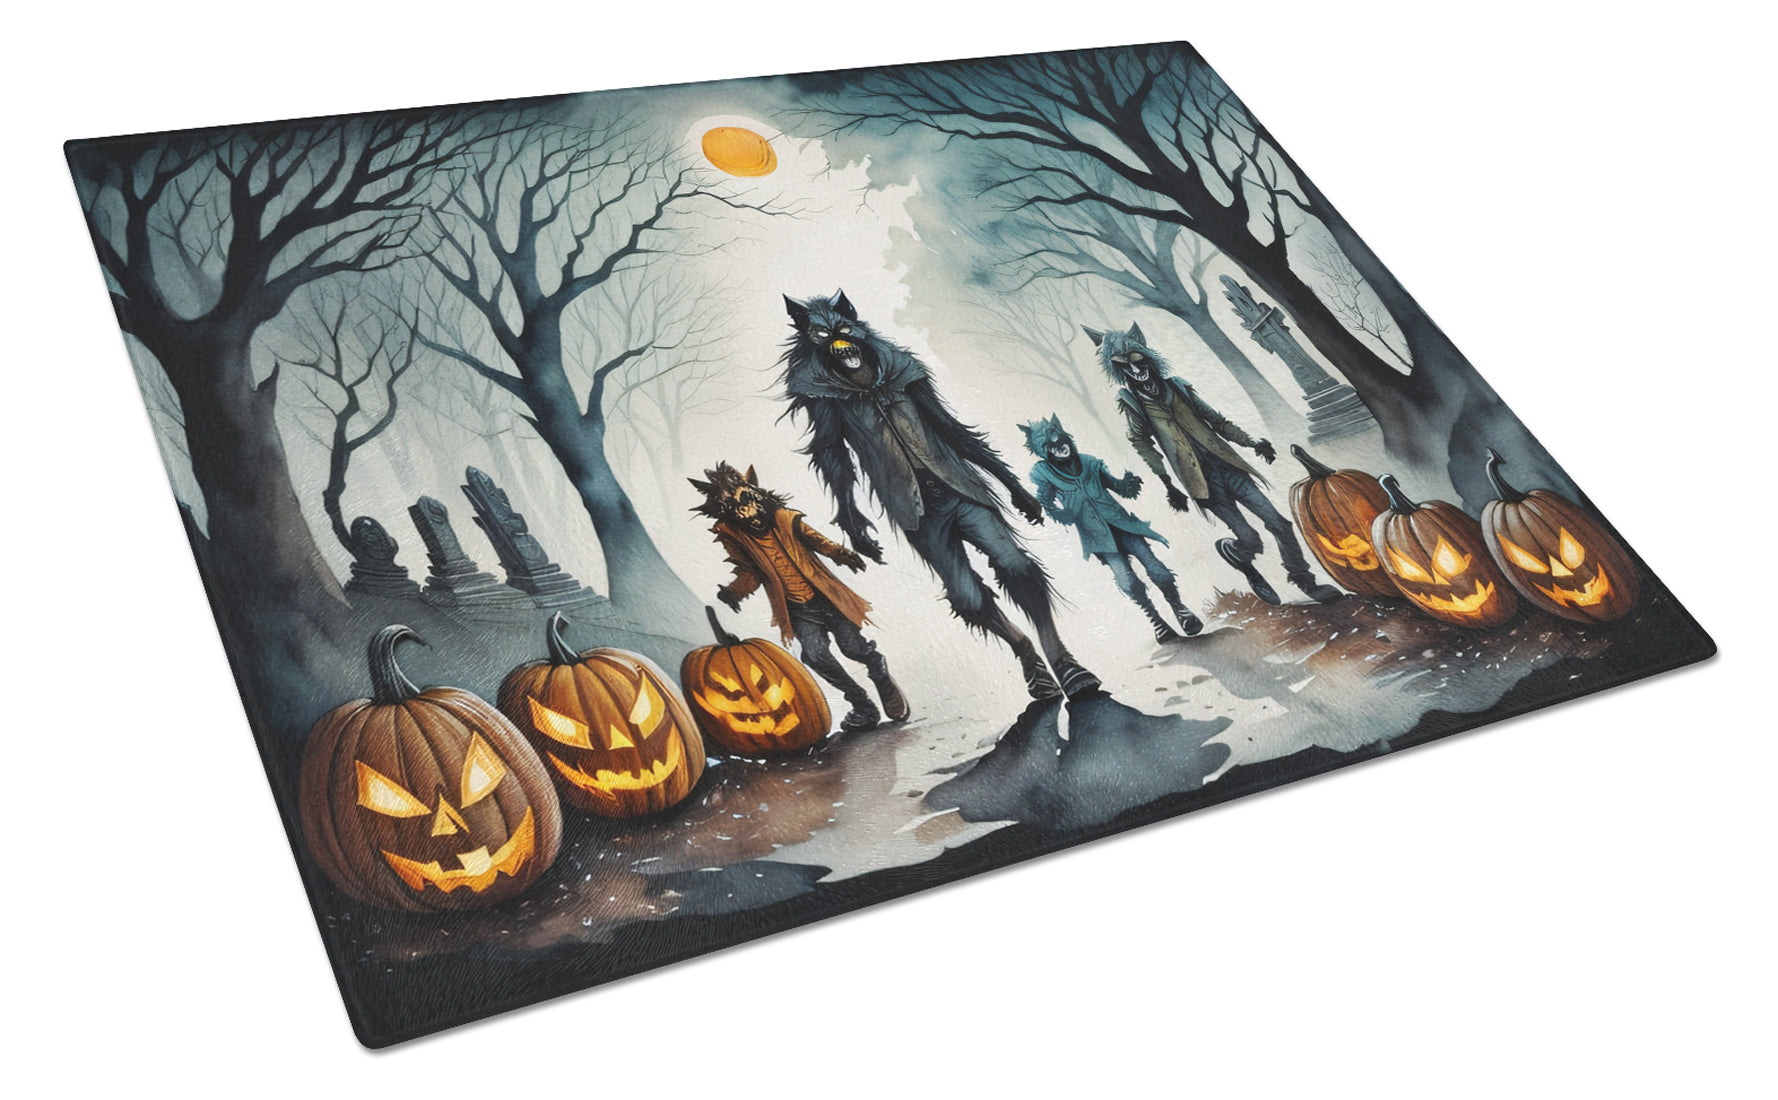 Buy this Werewolves Spooky Halloween Glass Cutting Board Large